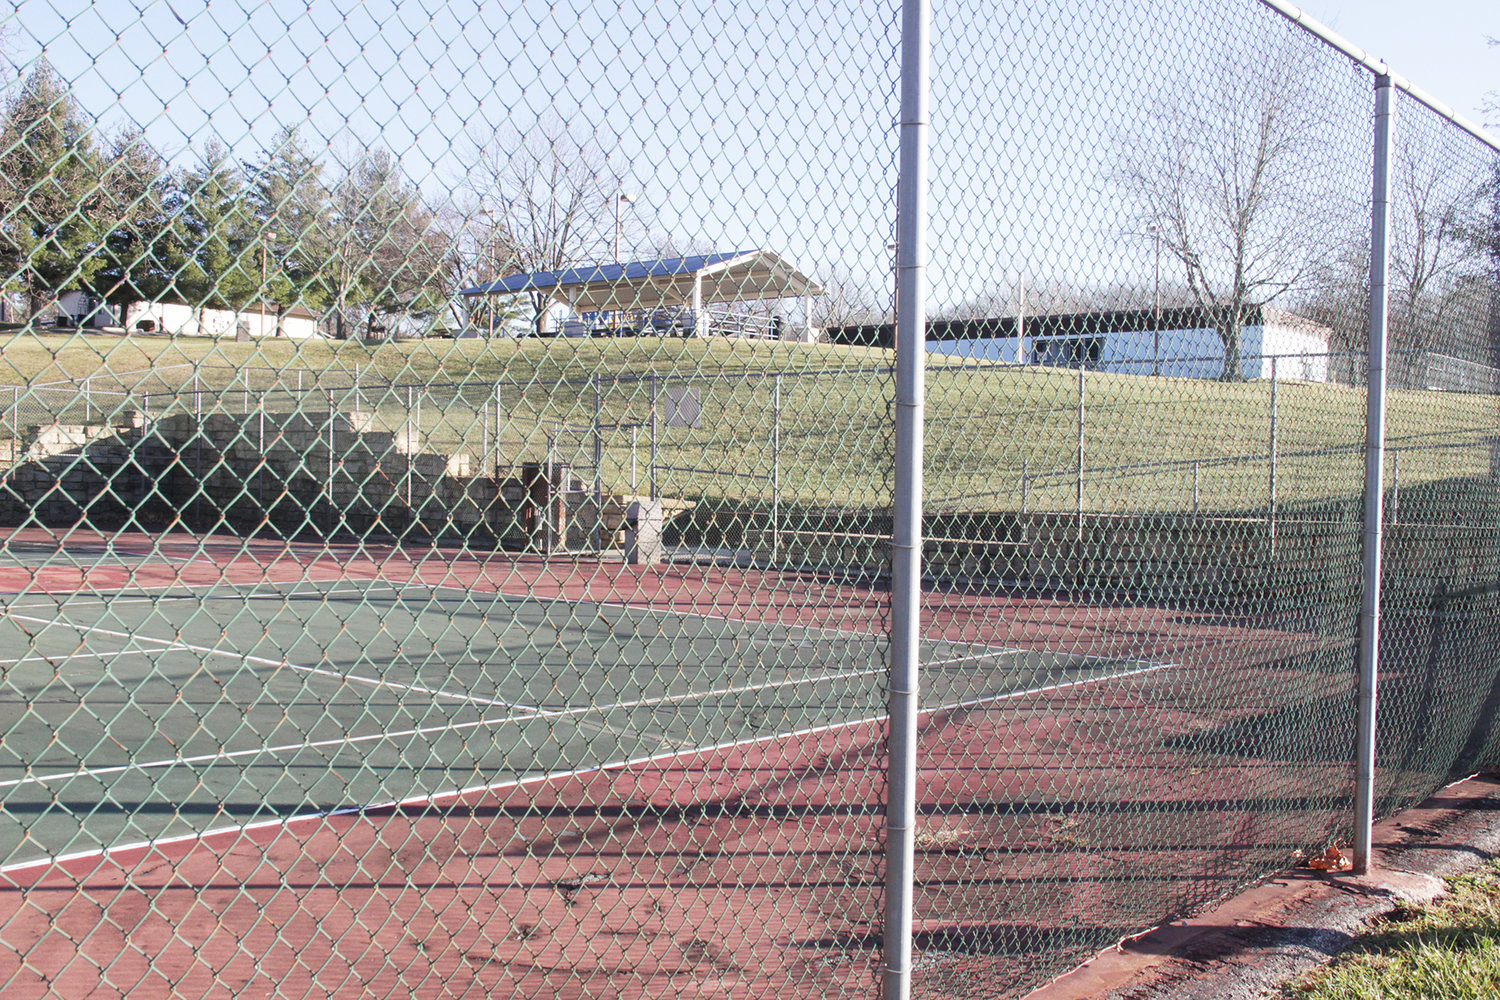 NEEDS TLC — Surface deterioration due to water seepage is visible at the tennis court in Warrenton's Morgan Park. Behind, on the right, is the facility for the city's decommissioned outdoor pool. City leaders want public input on what improvements to make at the park.